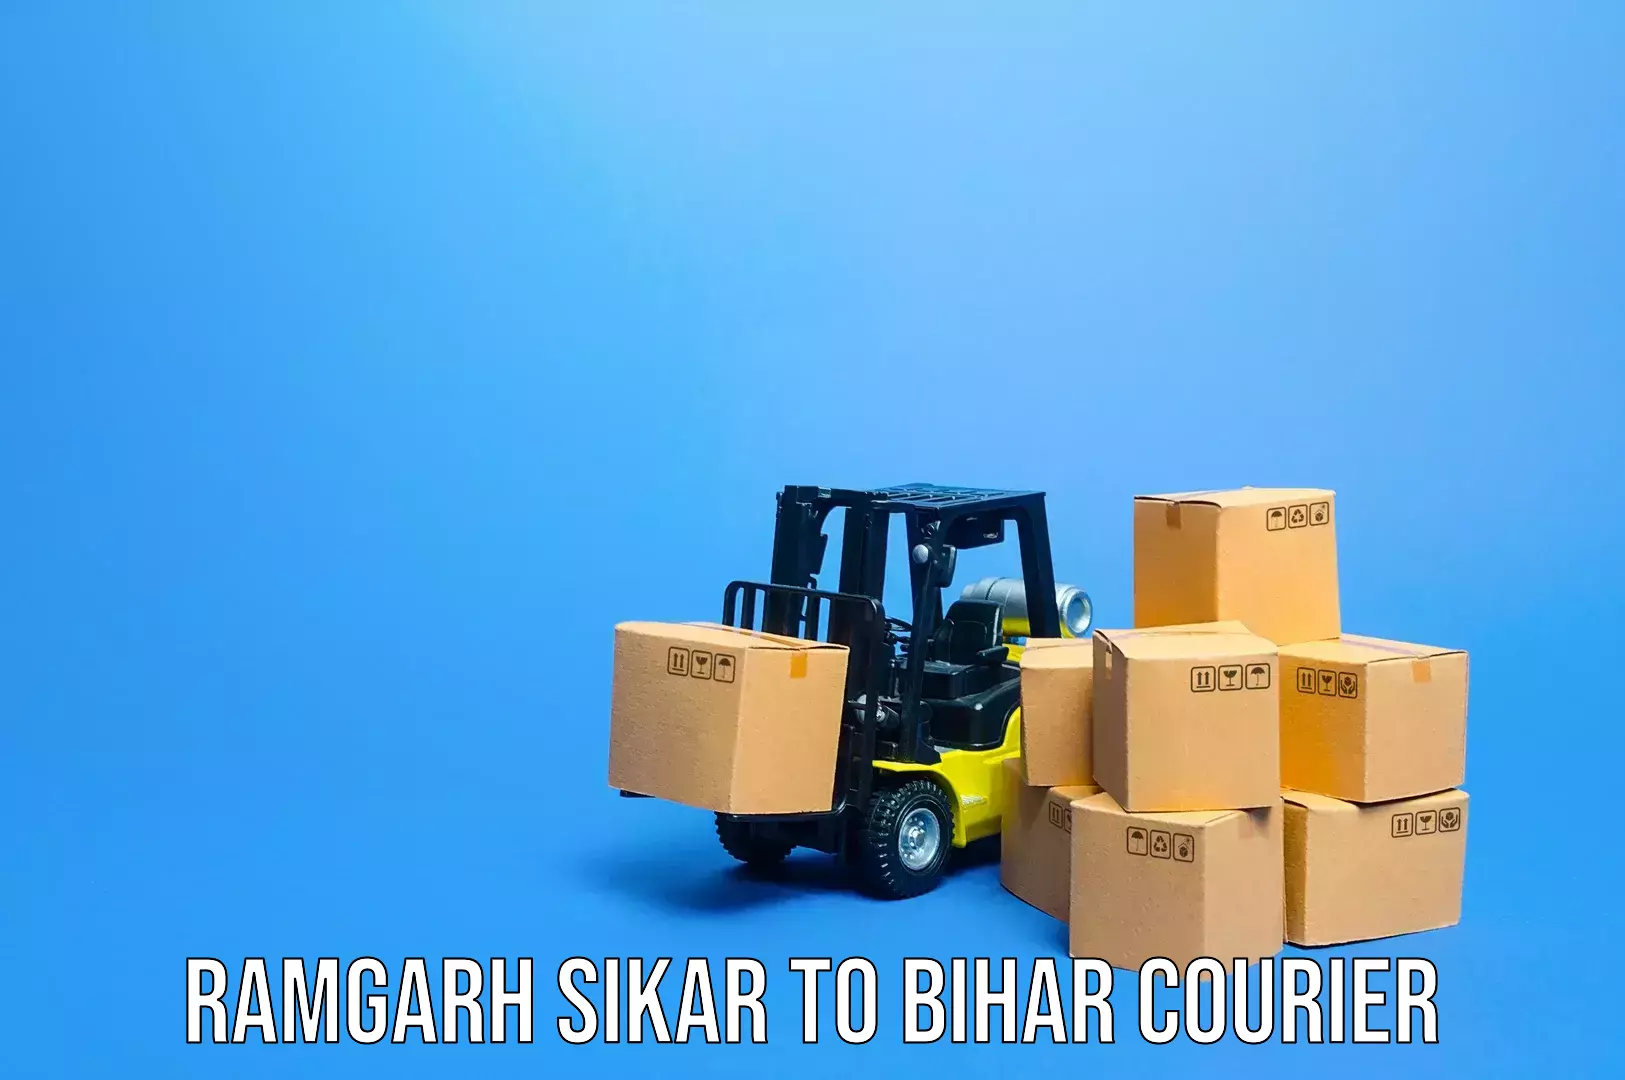 Luggage delivery system Ramgarh Sikar to Kochas